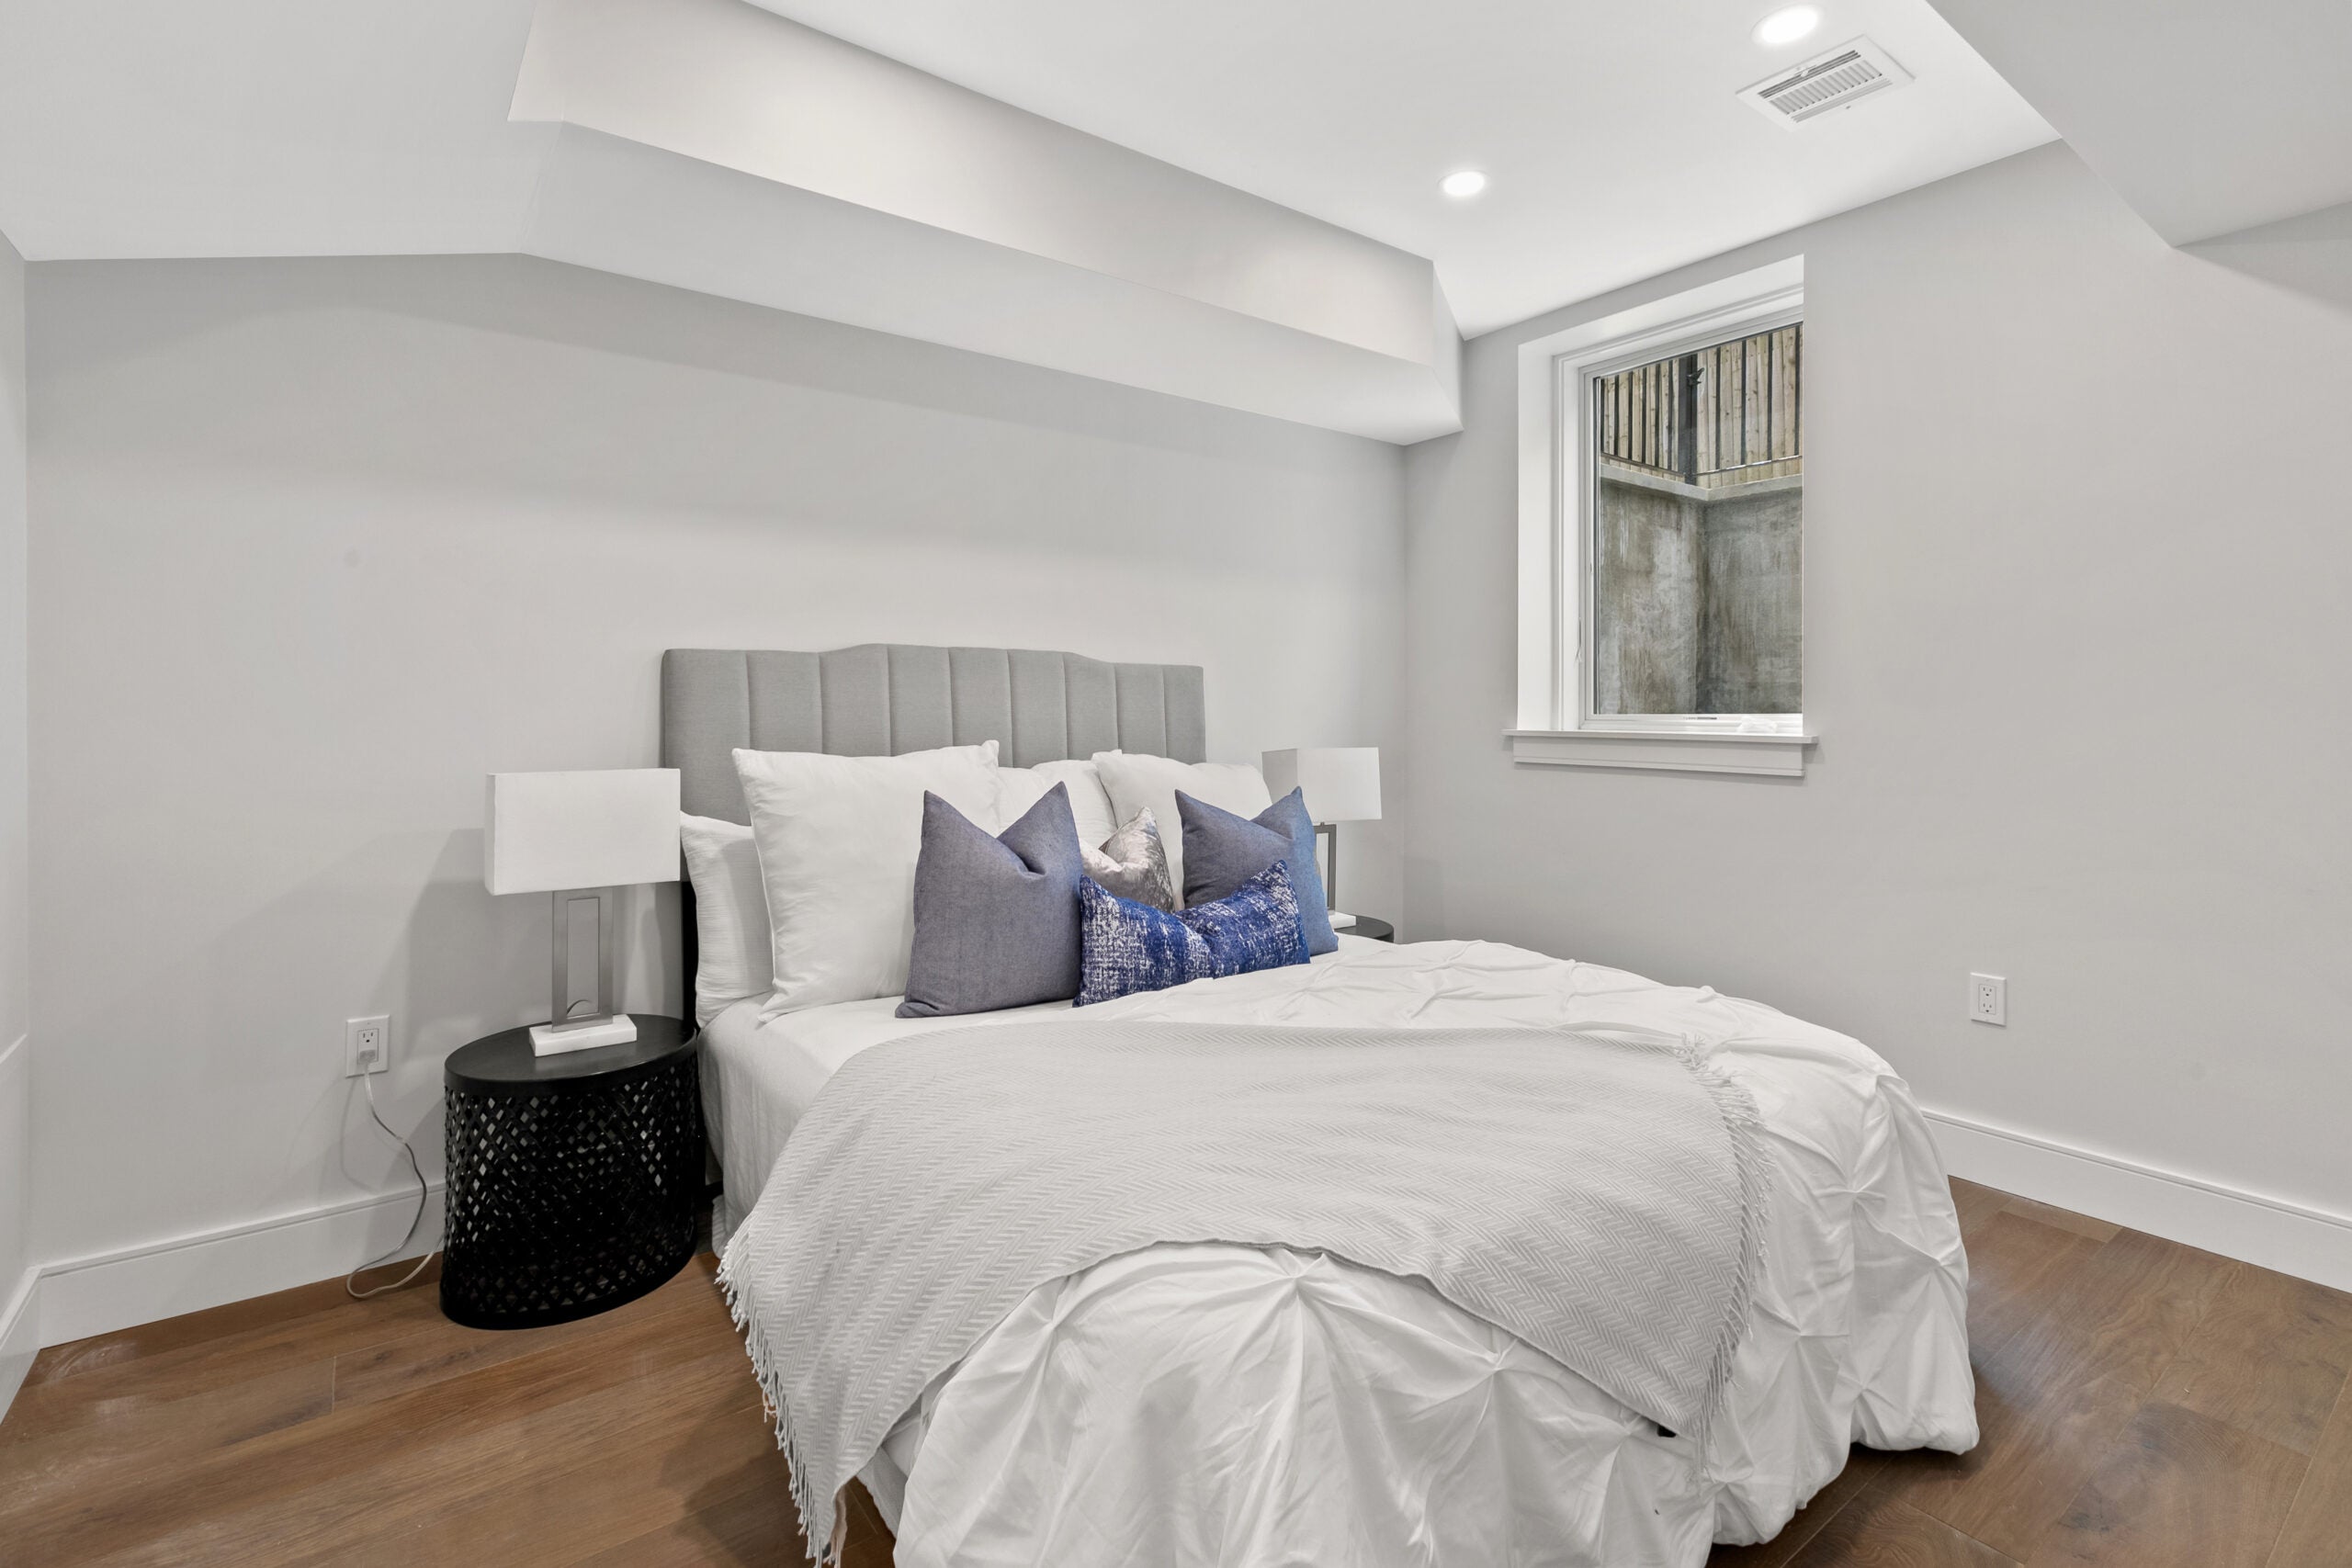 The bottom floor bedroom with a window, recessed lighting and a bed in the center of the room at 154 Thorndike.